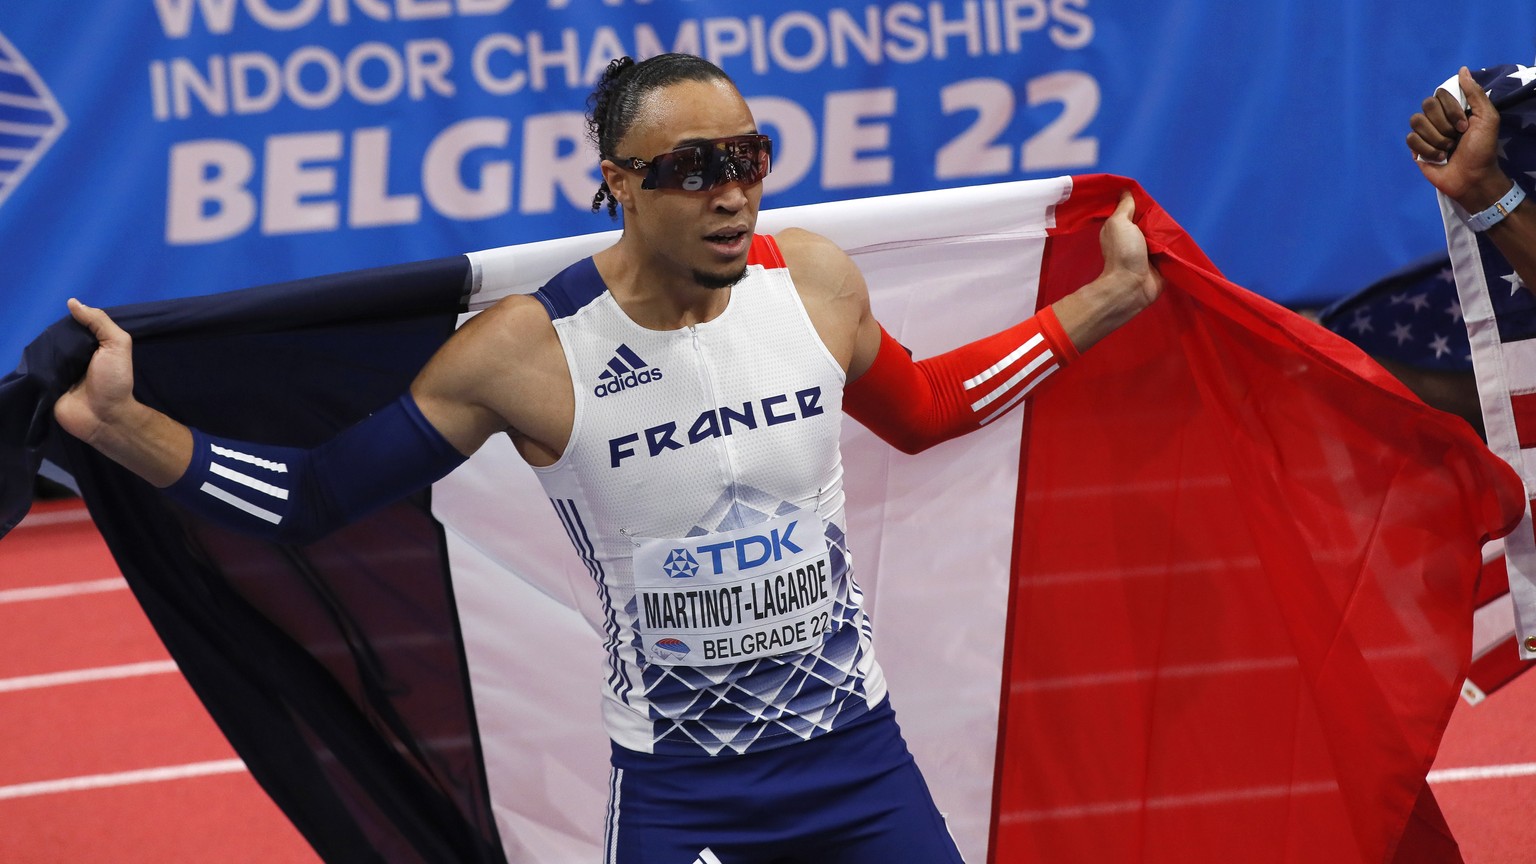 epa09839095 Pascal Martinot-Lagarde of France celebrates after taking the second place in the Men&#039;s 60m Hurdles final at the IAAF World Athletics Indoor Championships in Belgrade, Serbia, 20 Marc ...